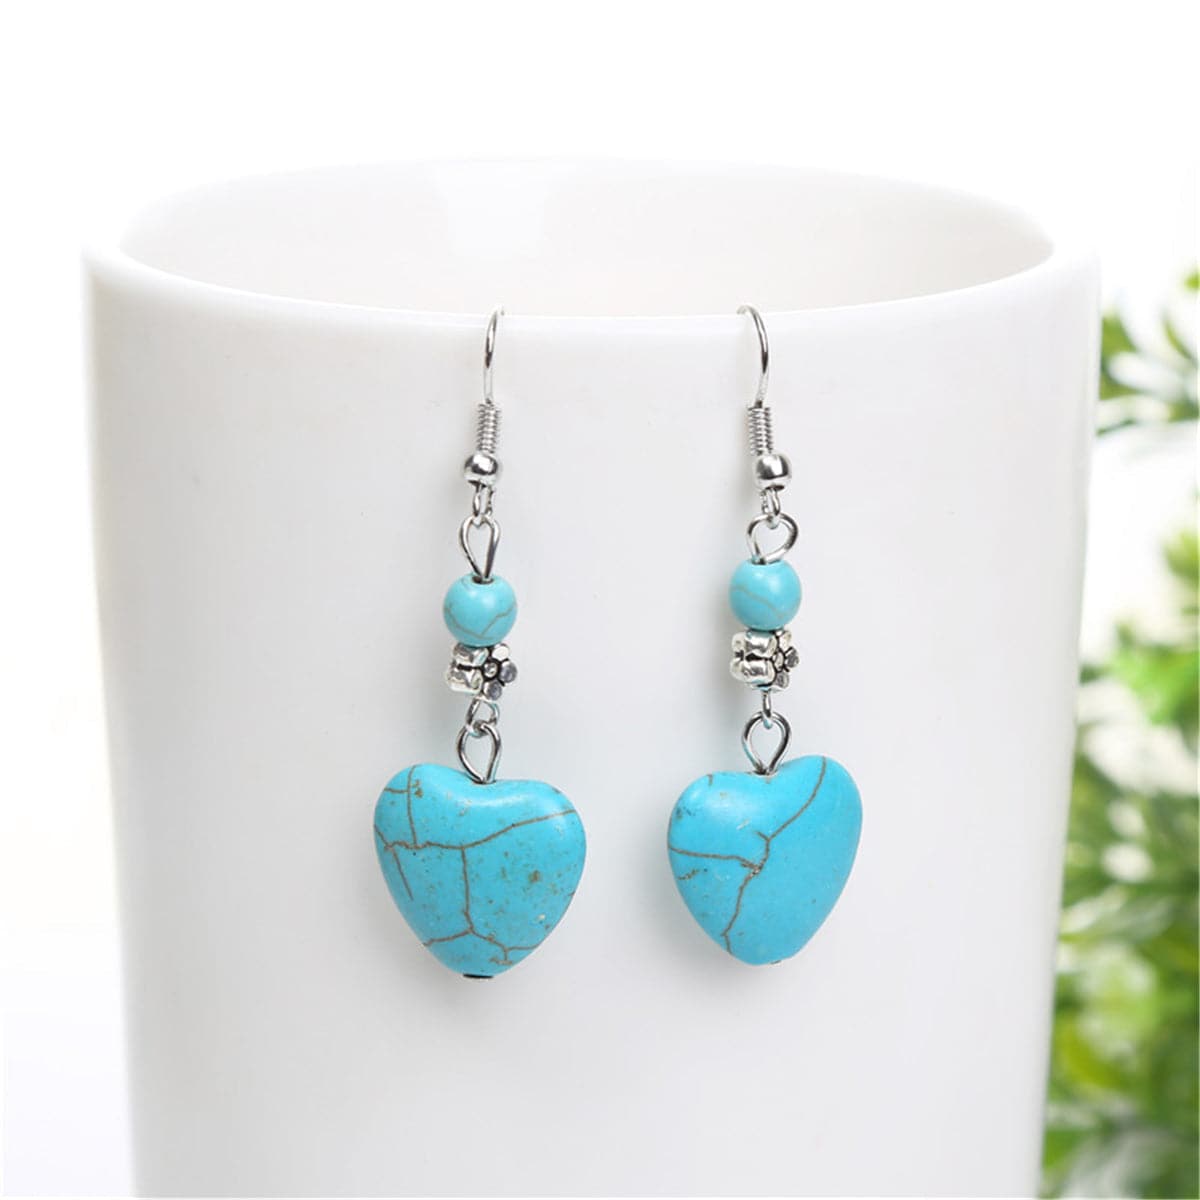 Turquoise & Silver-Plated Heart Drop Earrings